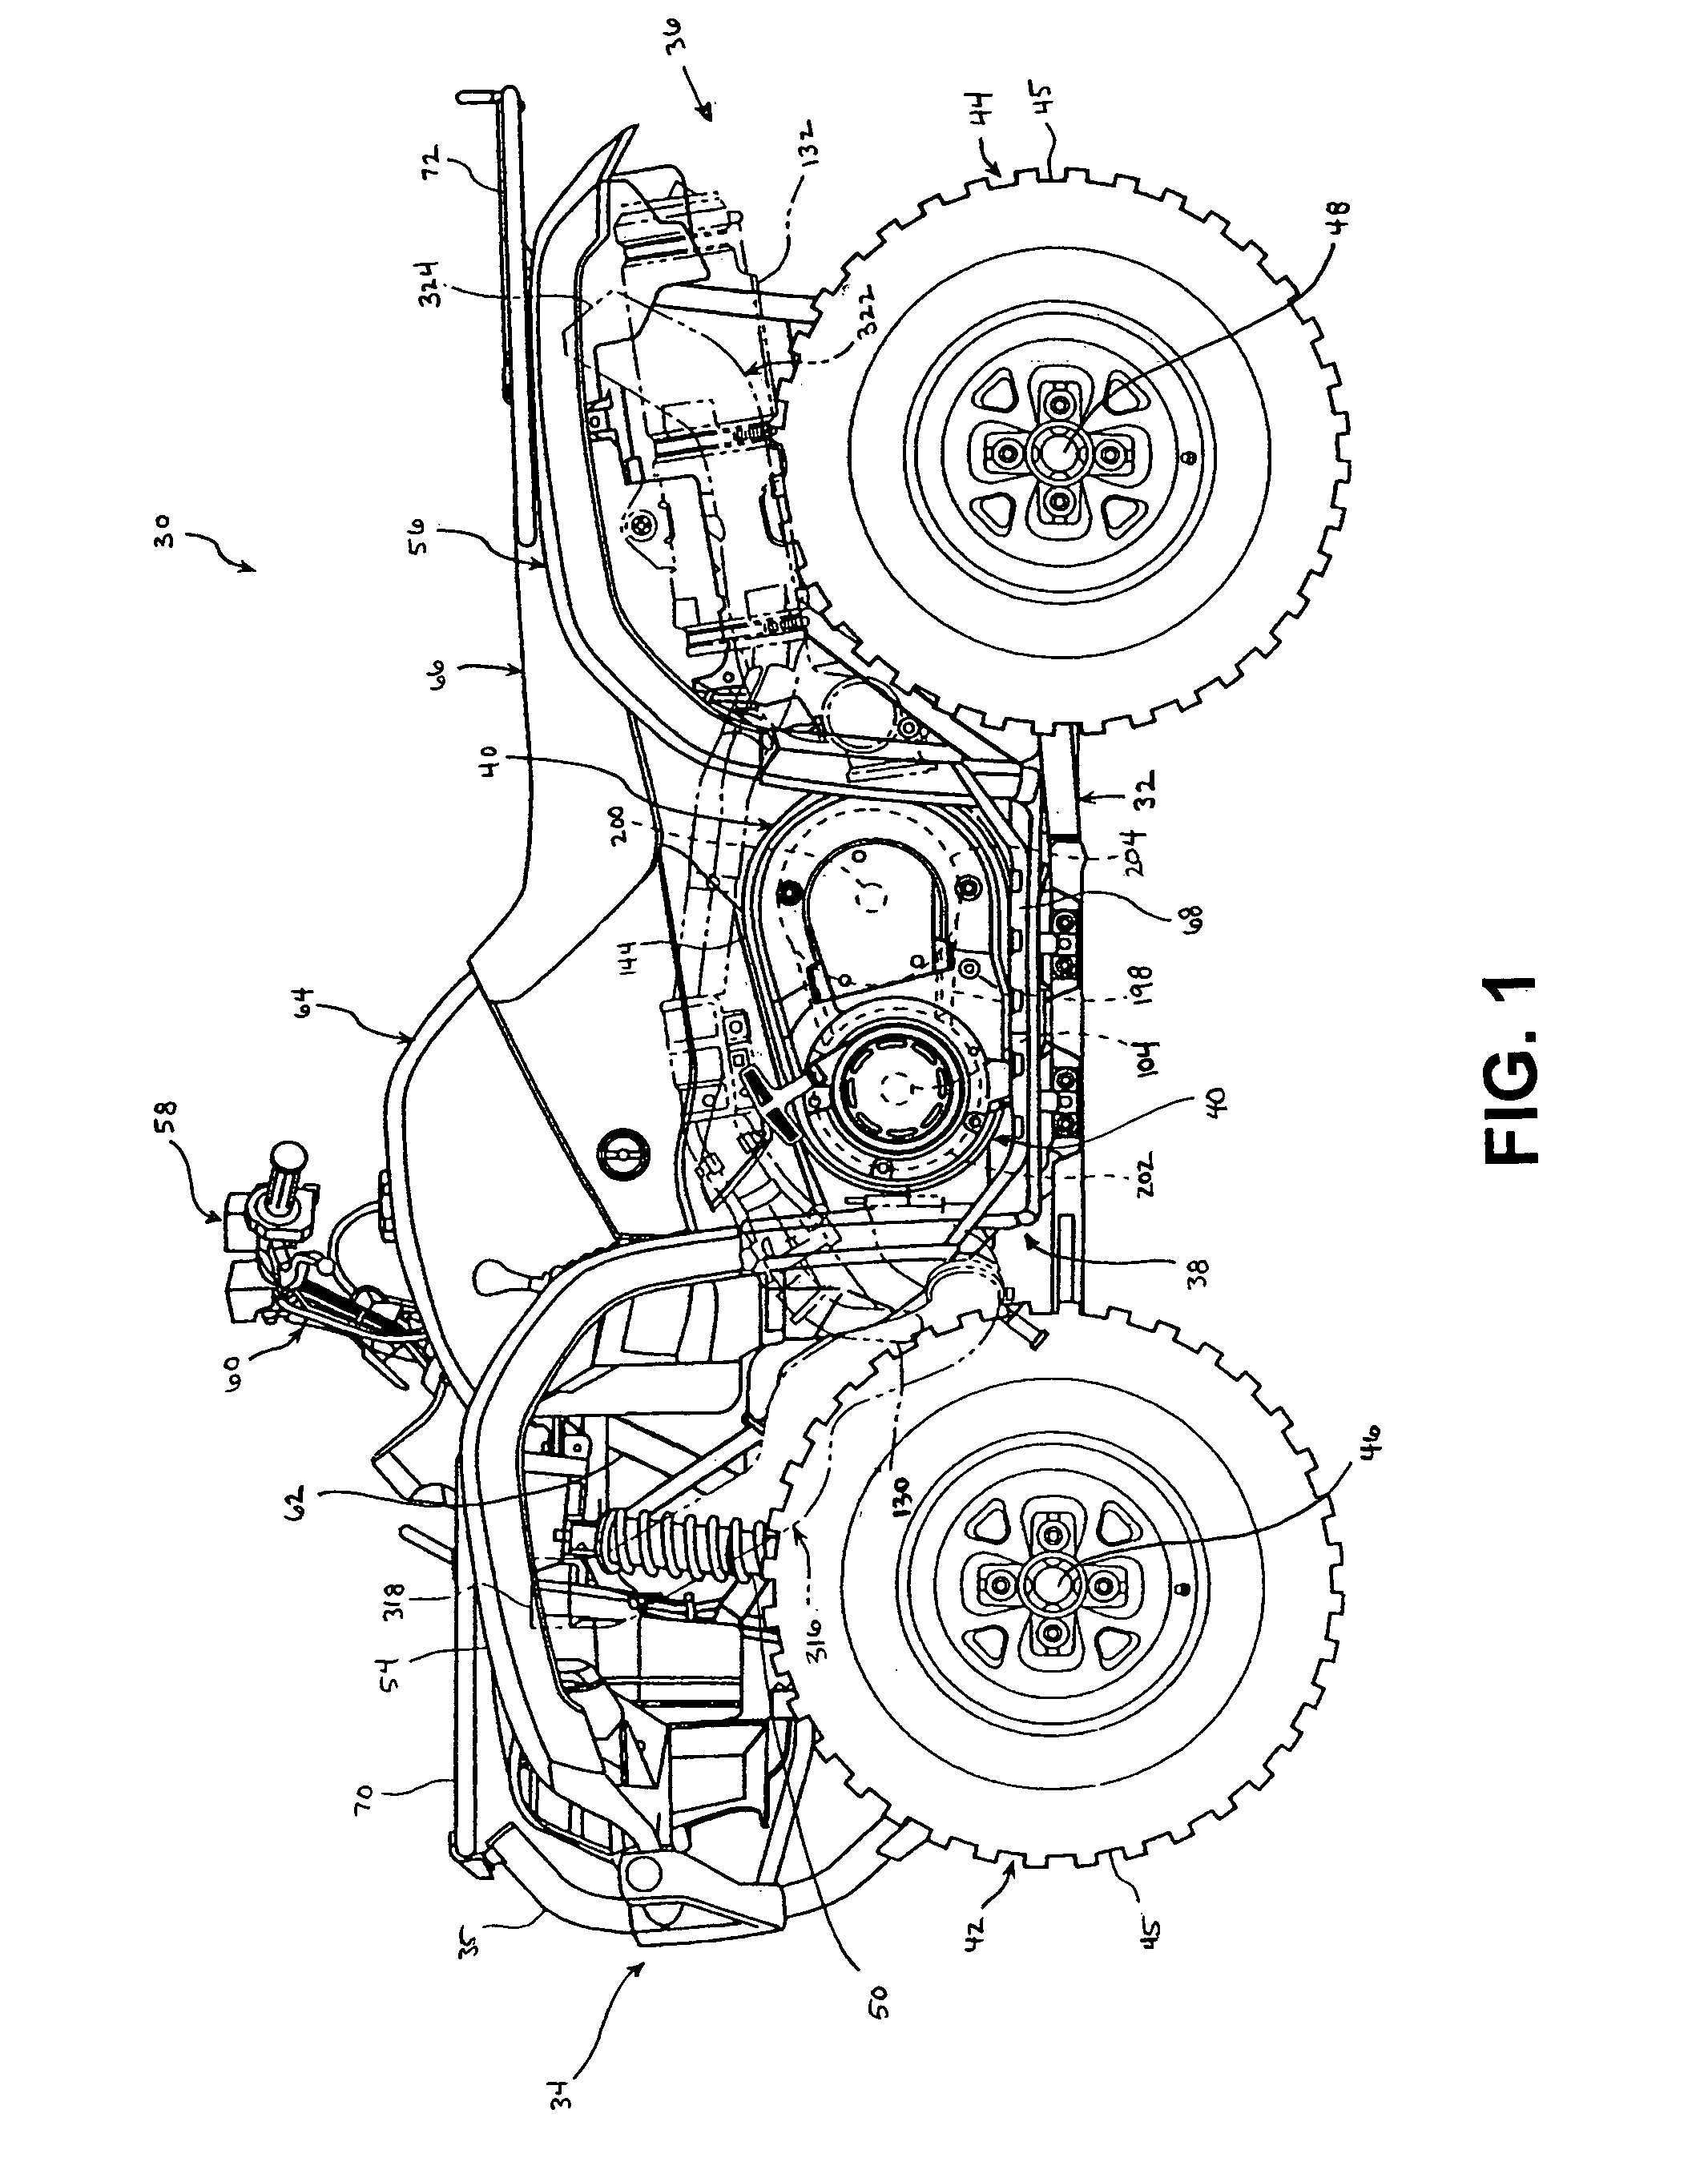 Drive belt cooling structure for engine